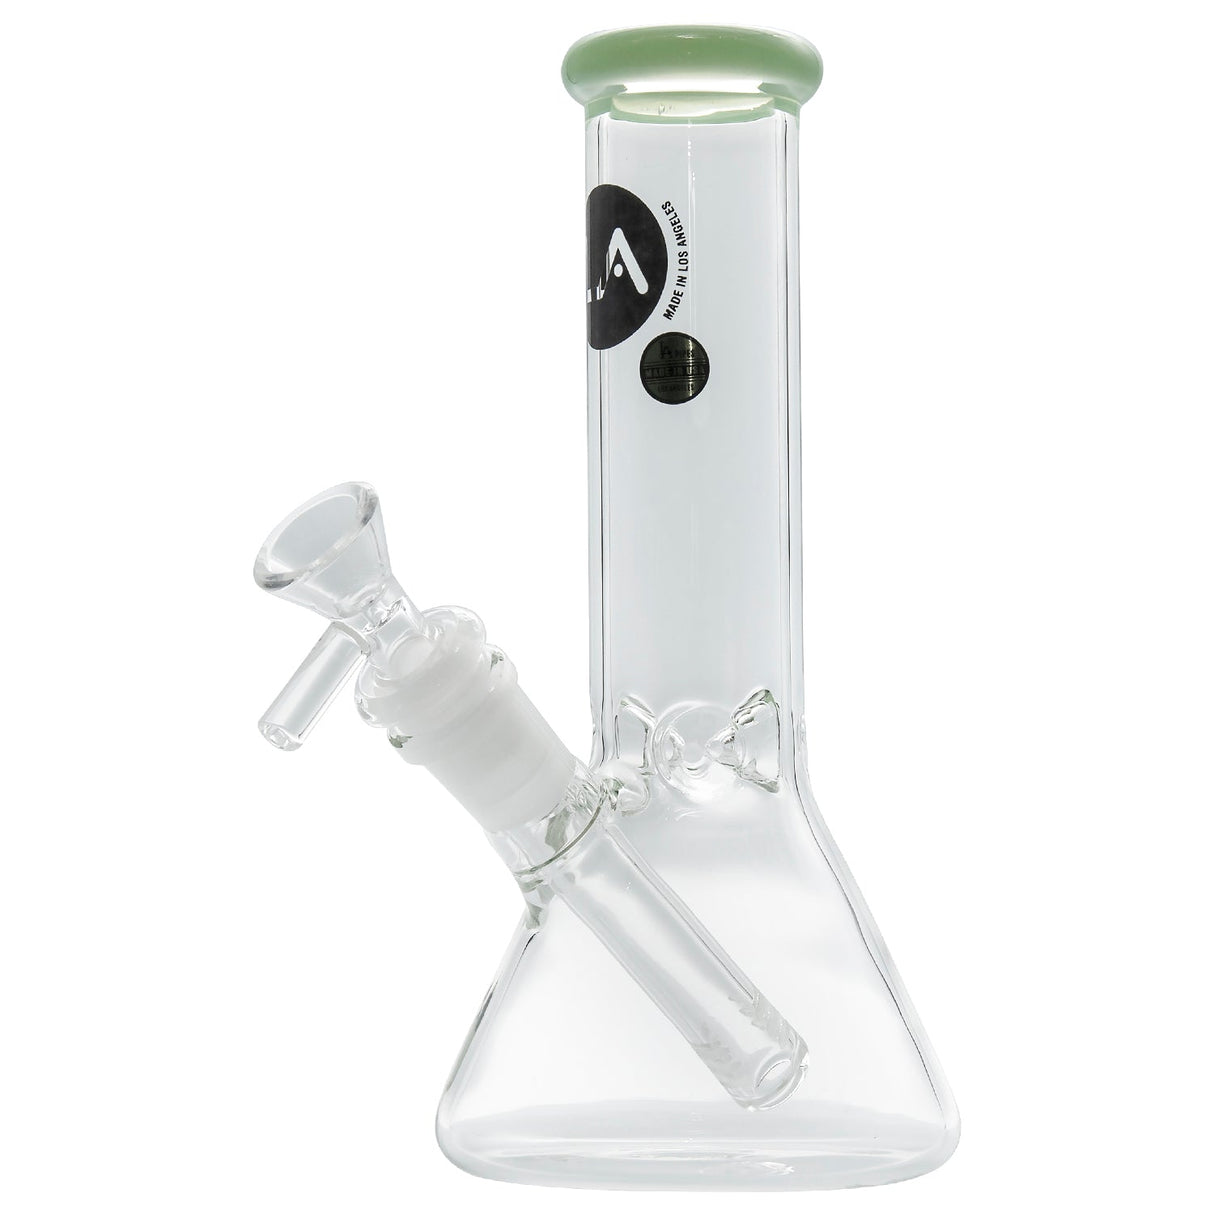 LA Pipes 8" Beaker Bong in translucent green, borosilicate glass, front view on white background